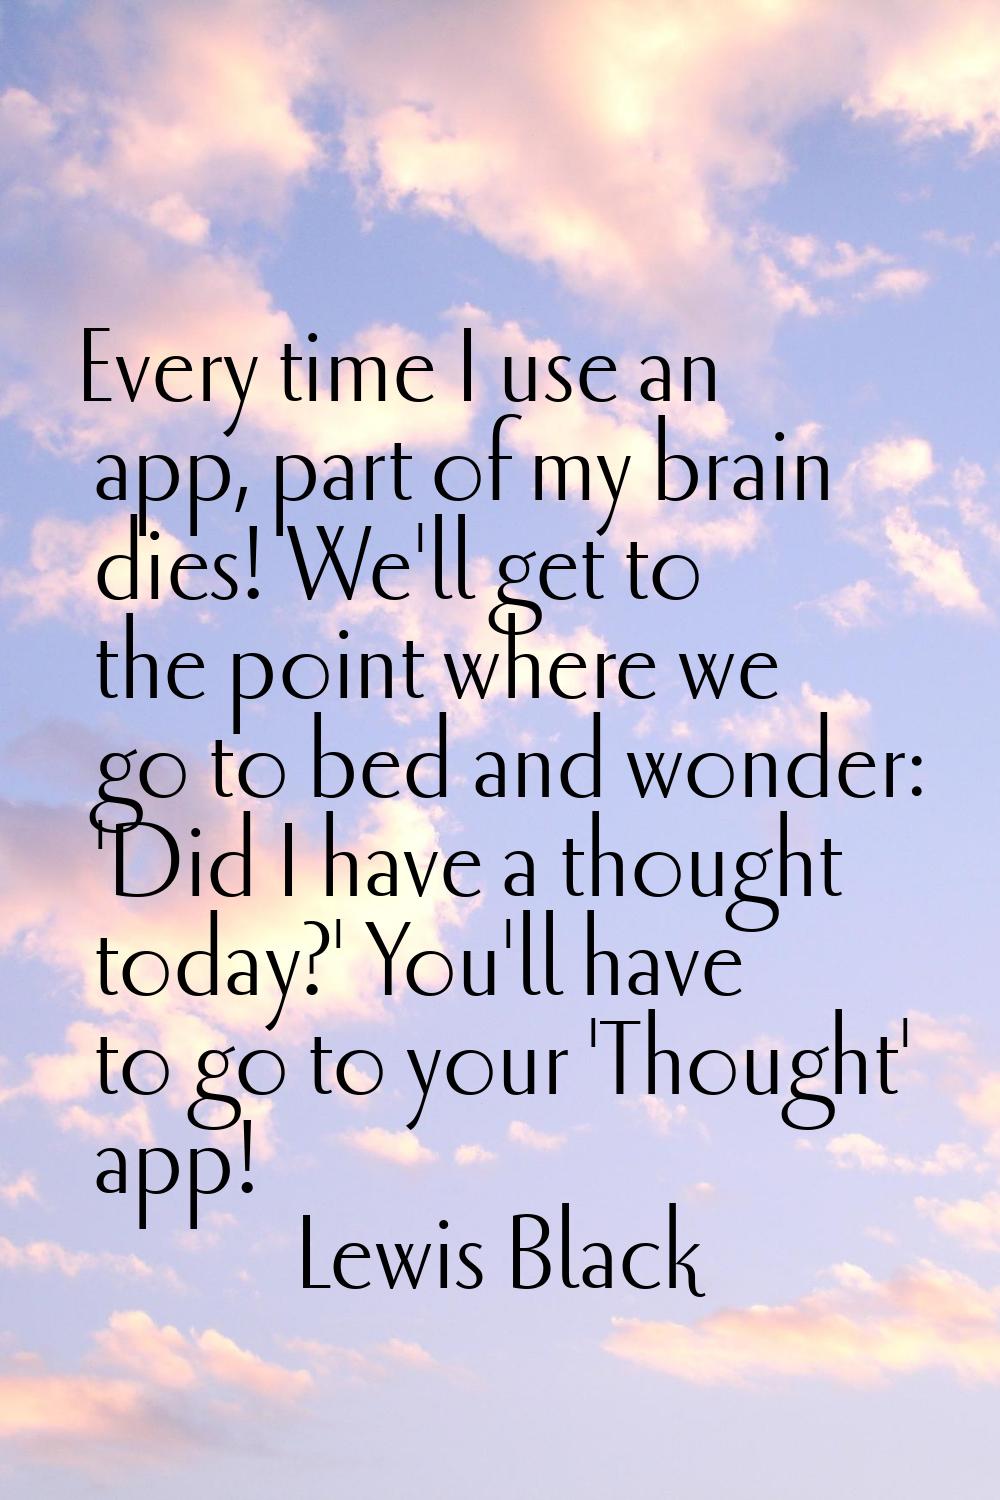 Every time I use an app, part of my brain dies! We'll get to the point where we go to bed and wonde